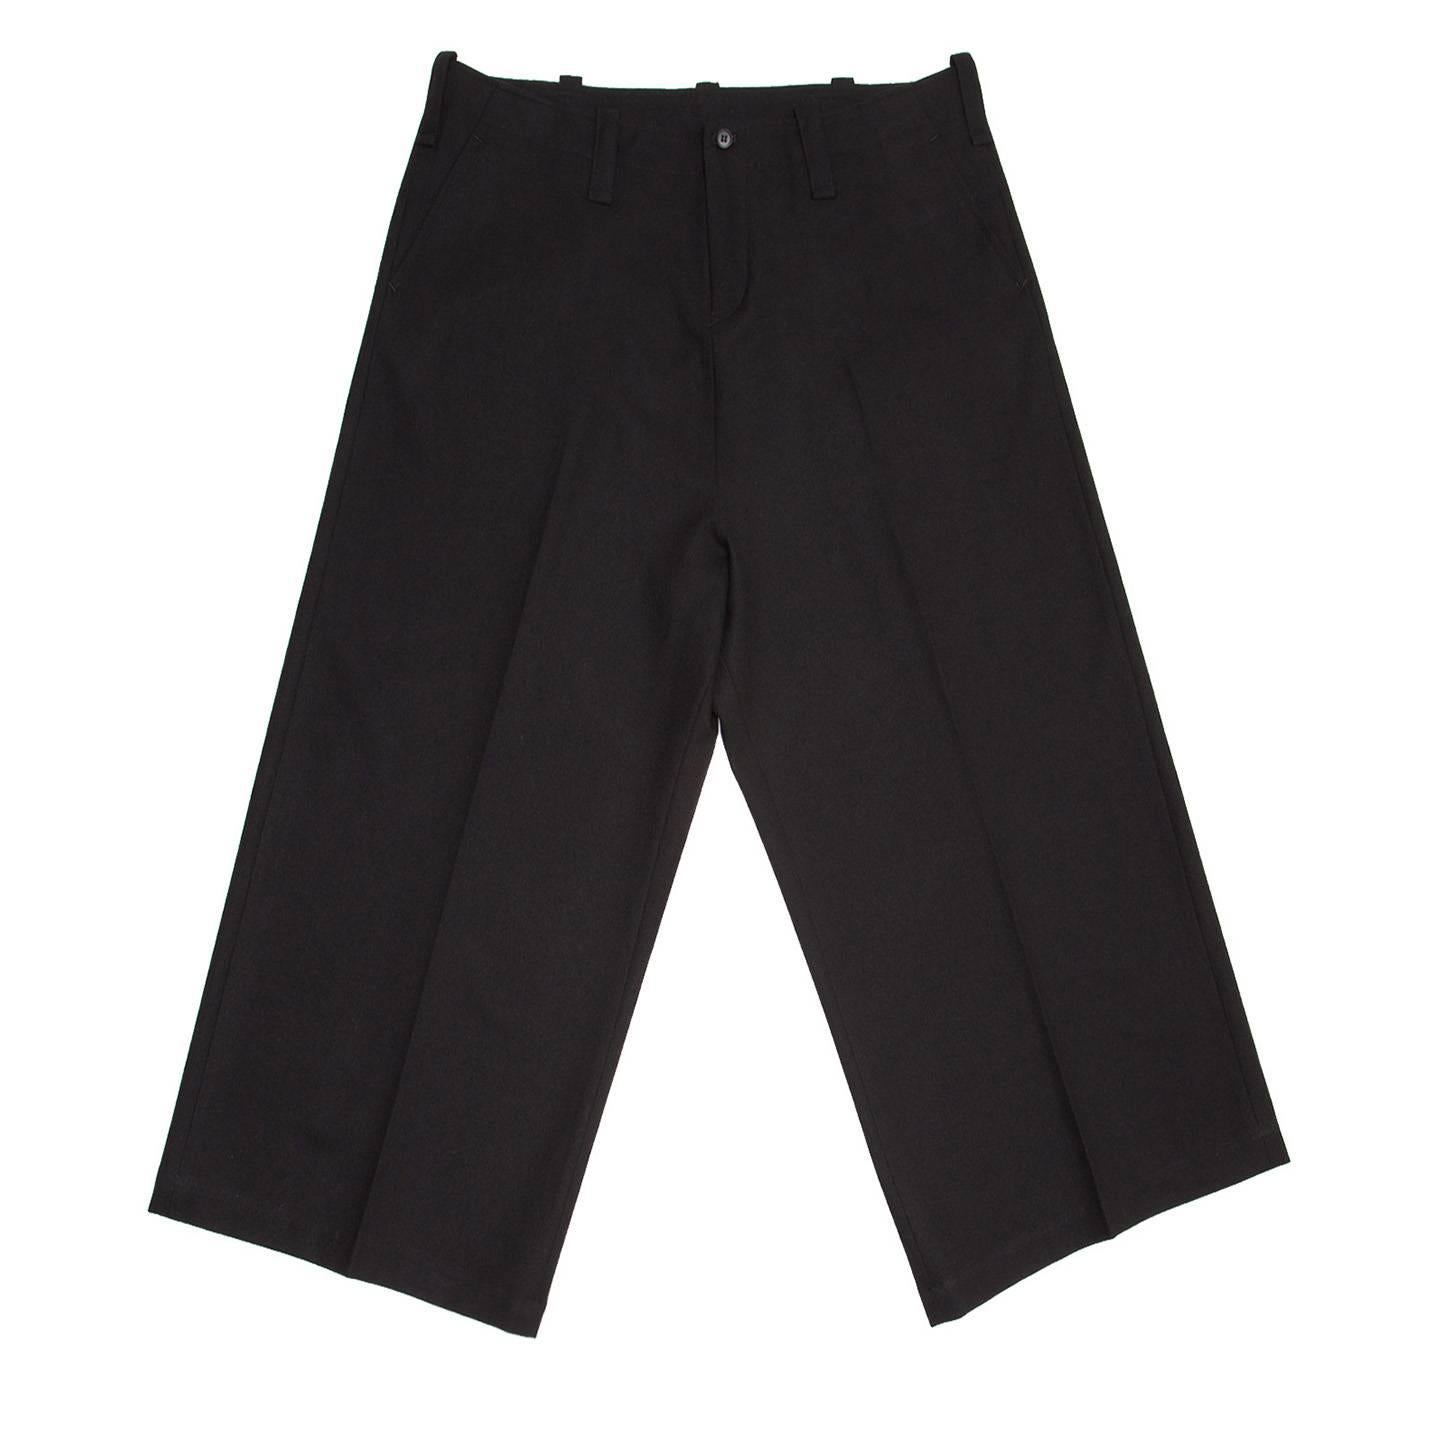 Yohji Yamamoto black wool cropped pants with very wide legs. They are a suit pleated style with slash pockets at front starting at top edge of waist, which does not have a band but only a stitching line and wide belt loops.

Size  4 

Condition 